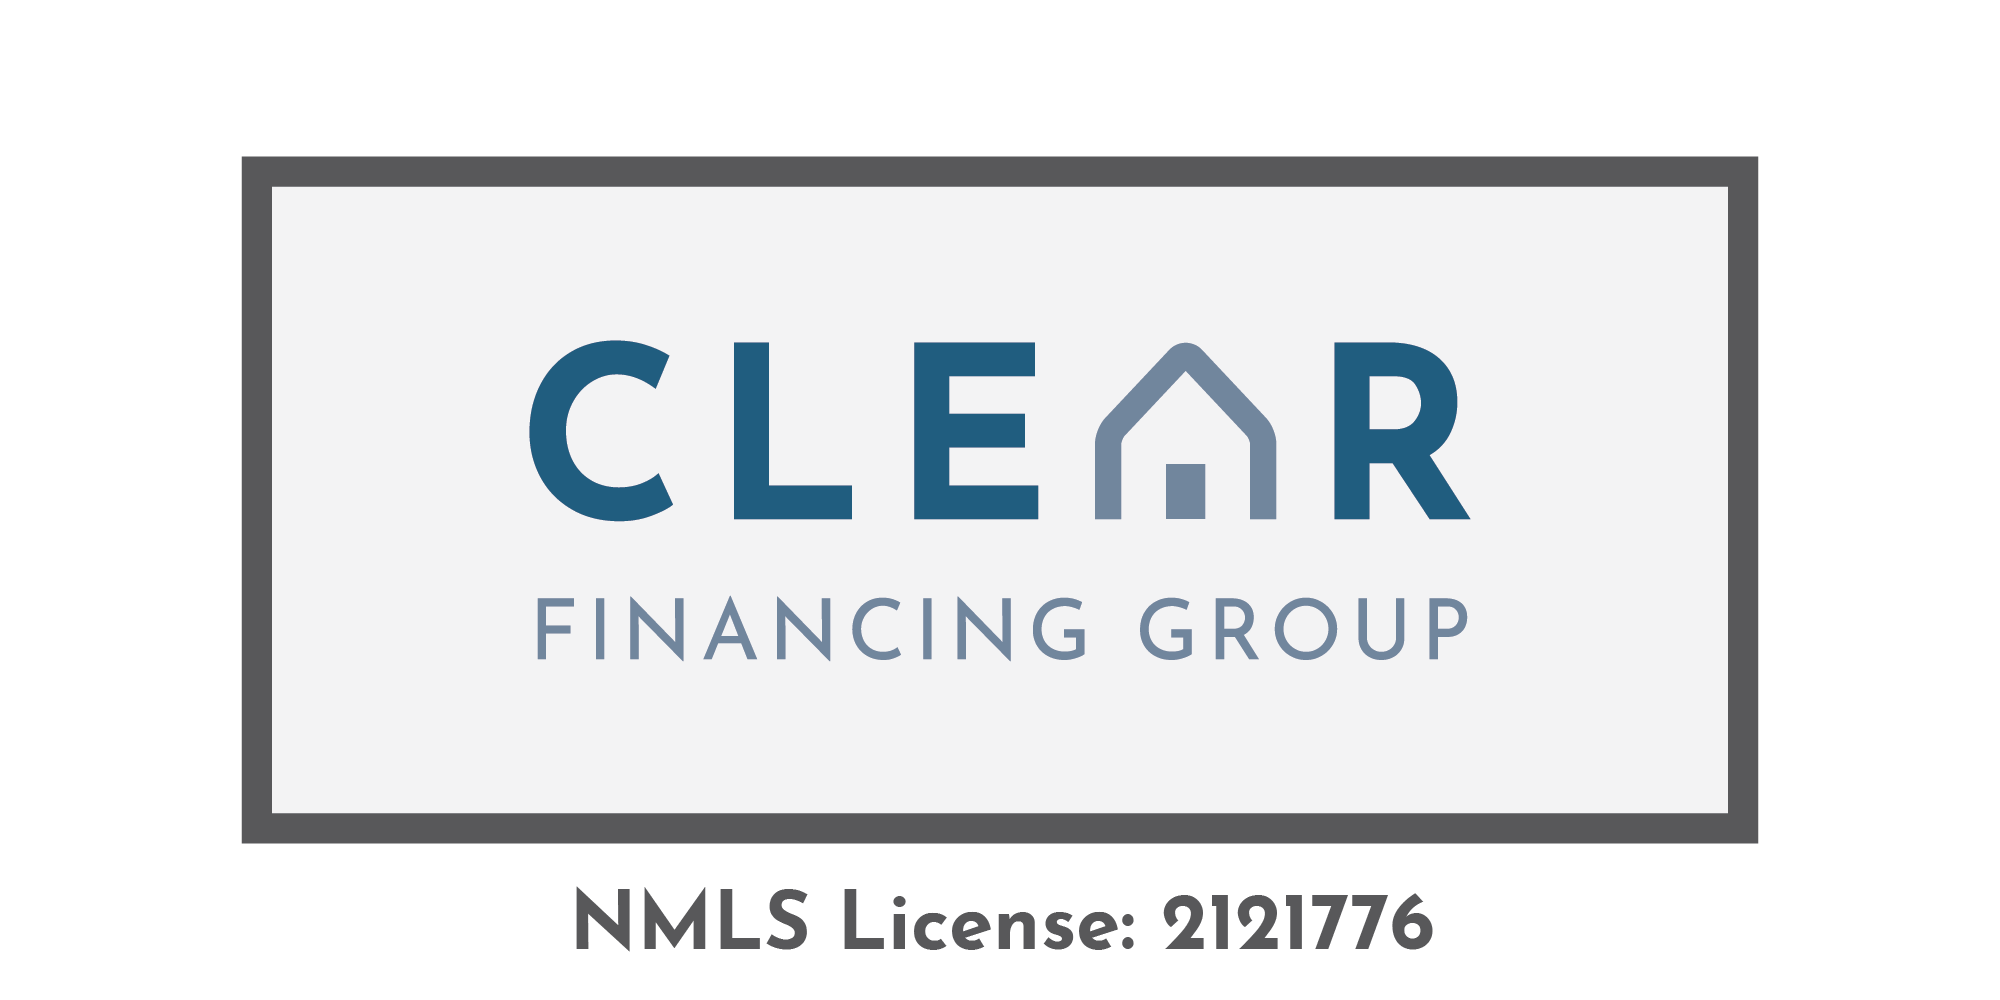 Clear Financing Group